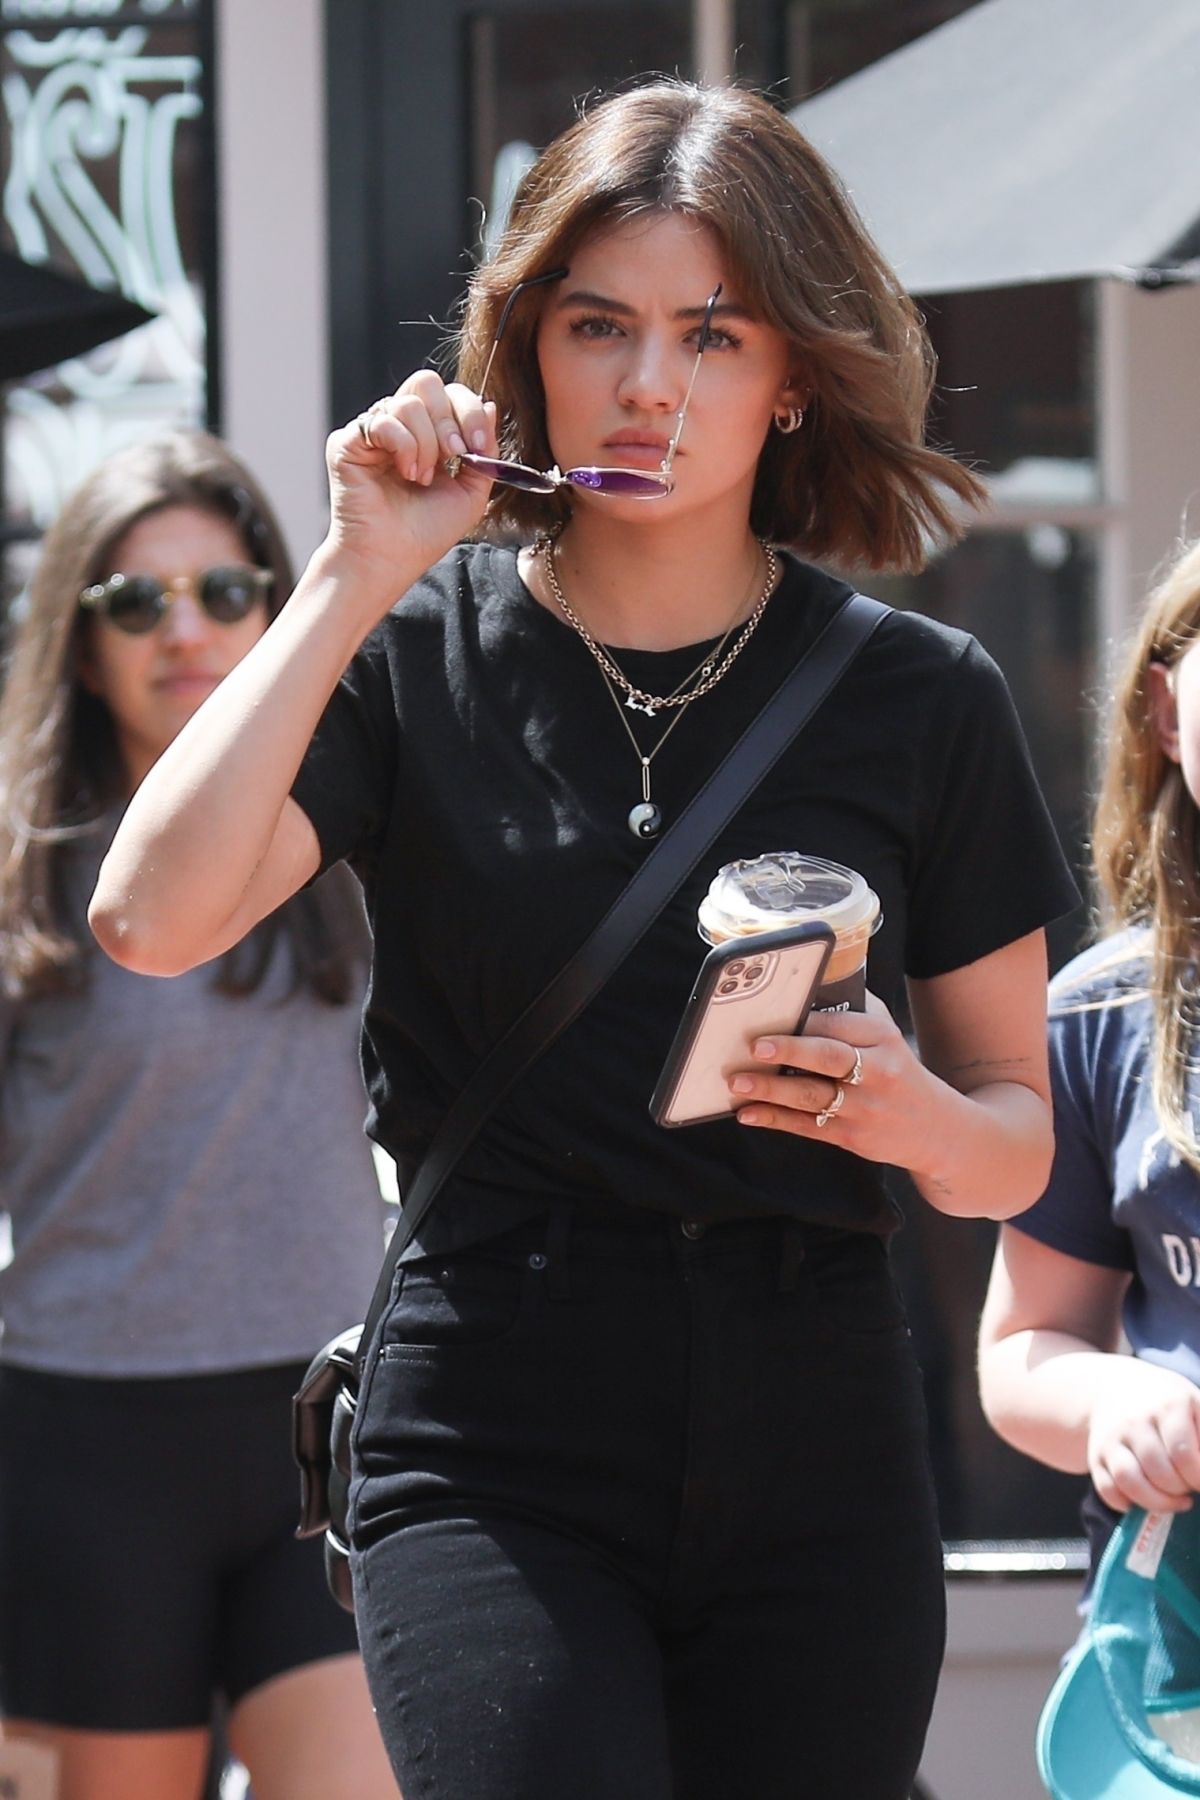 Lucy Hale Alfred's Coffee March 17, 2020 – Star Style